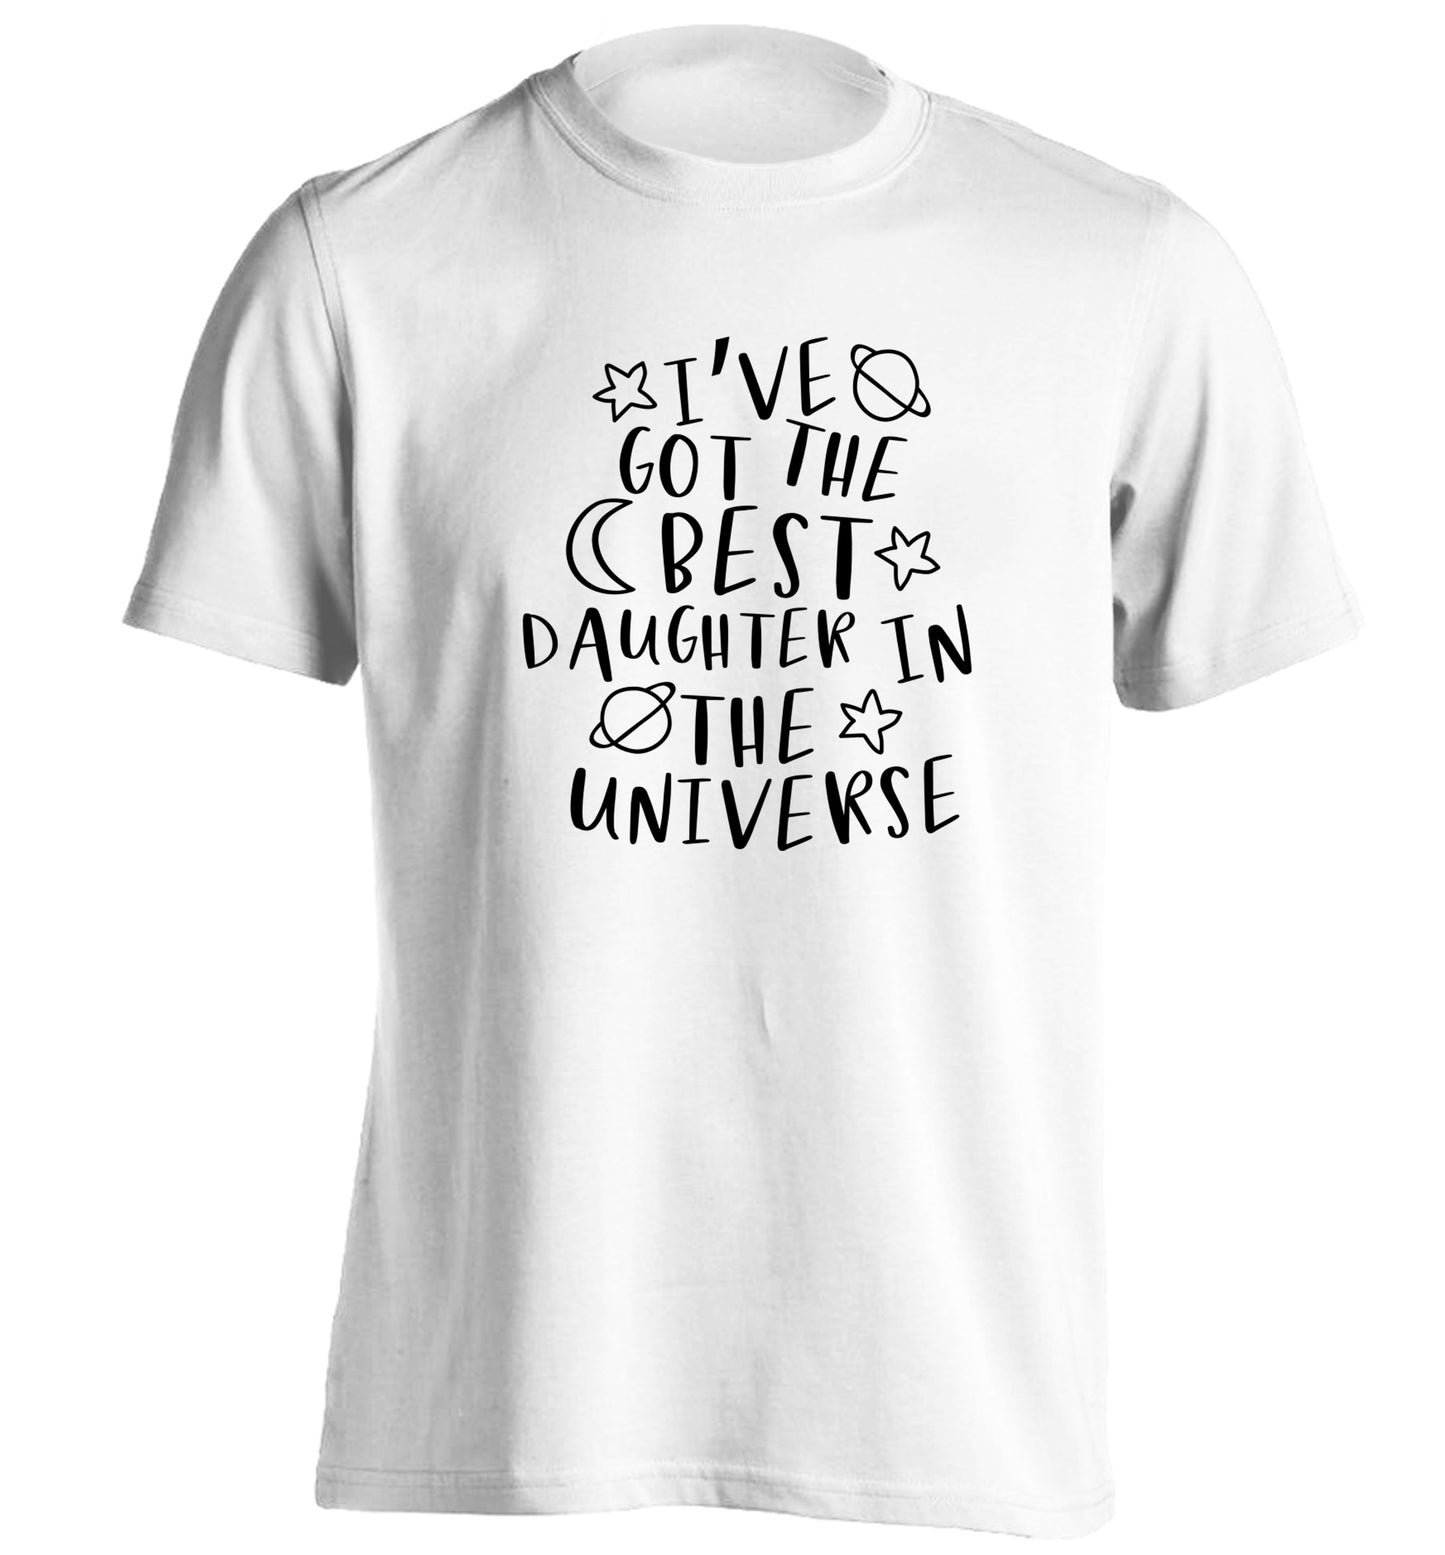 I've got the best daughter in the universe adults unisex white Tshirt 2XL